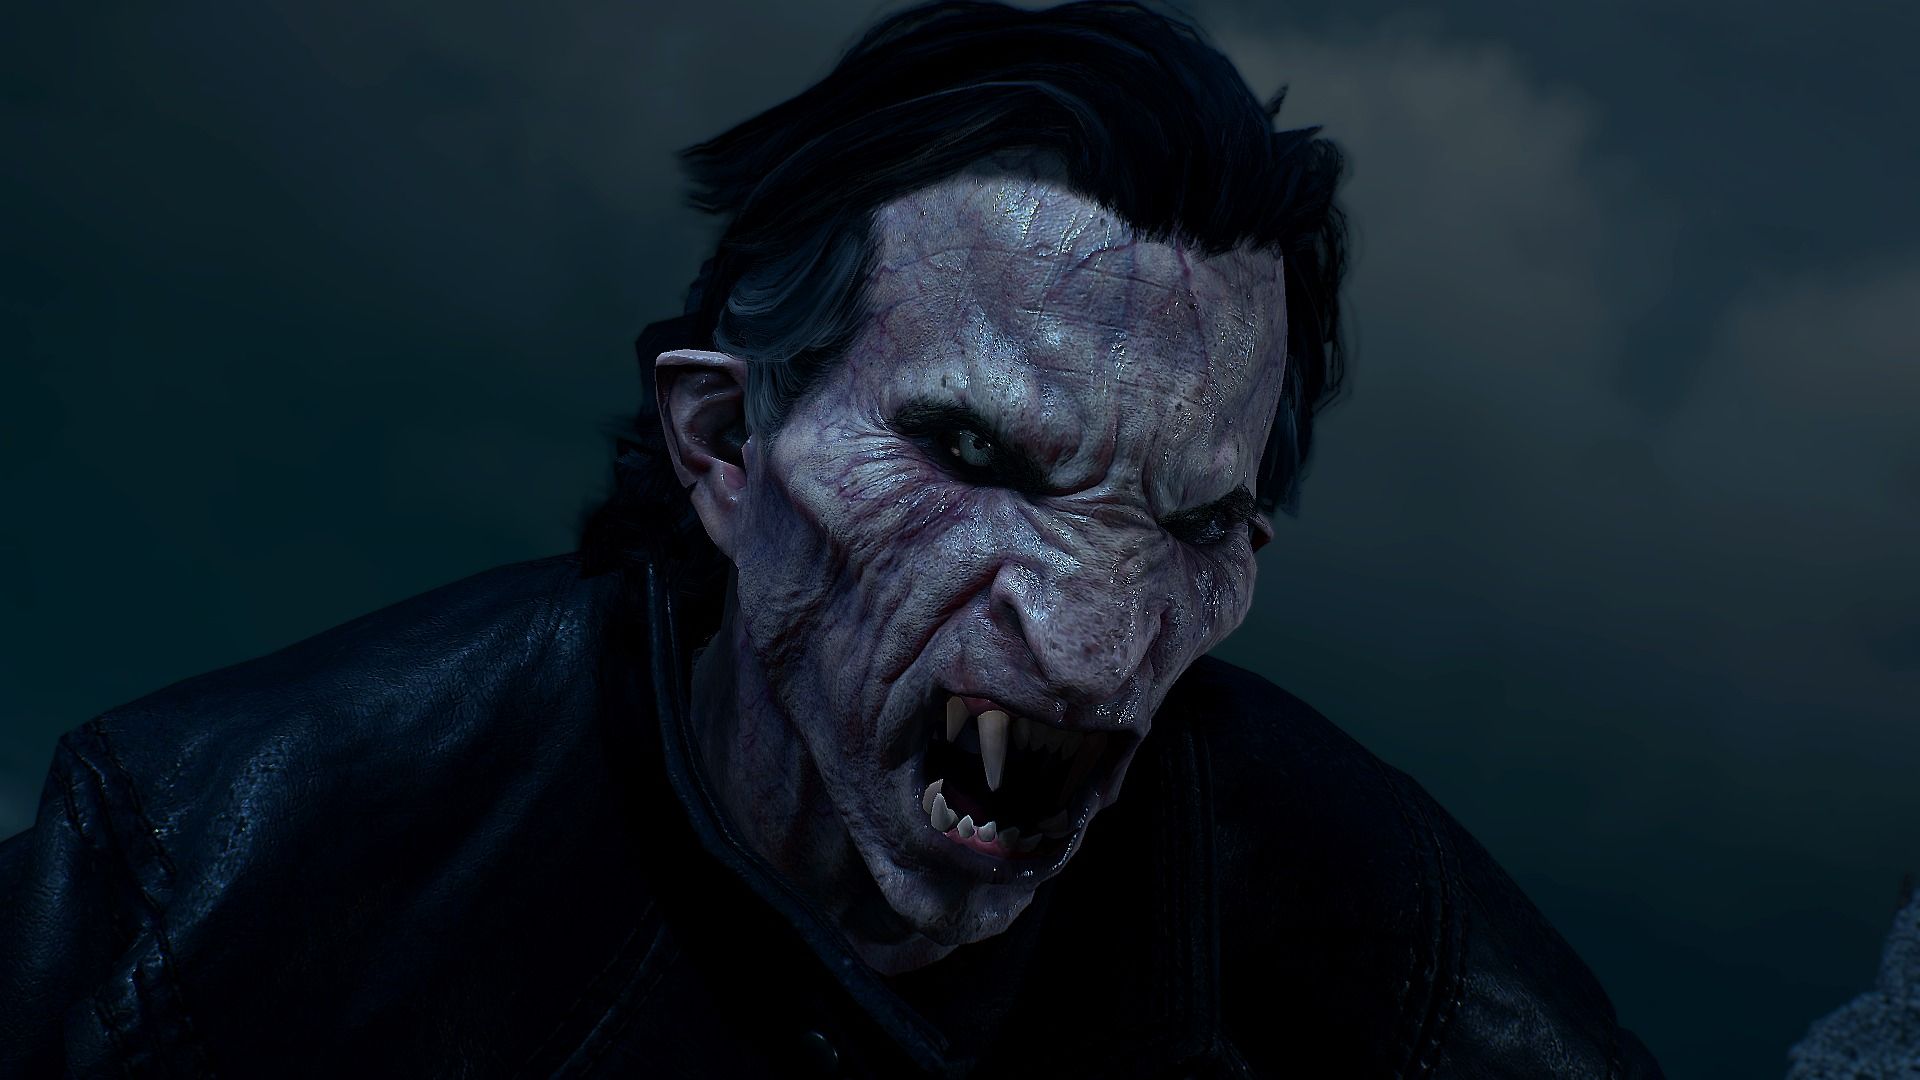 The Witcher 3 Higher Vampire Detlaff Face